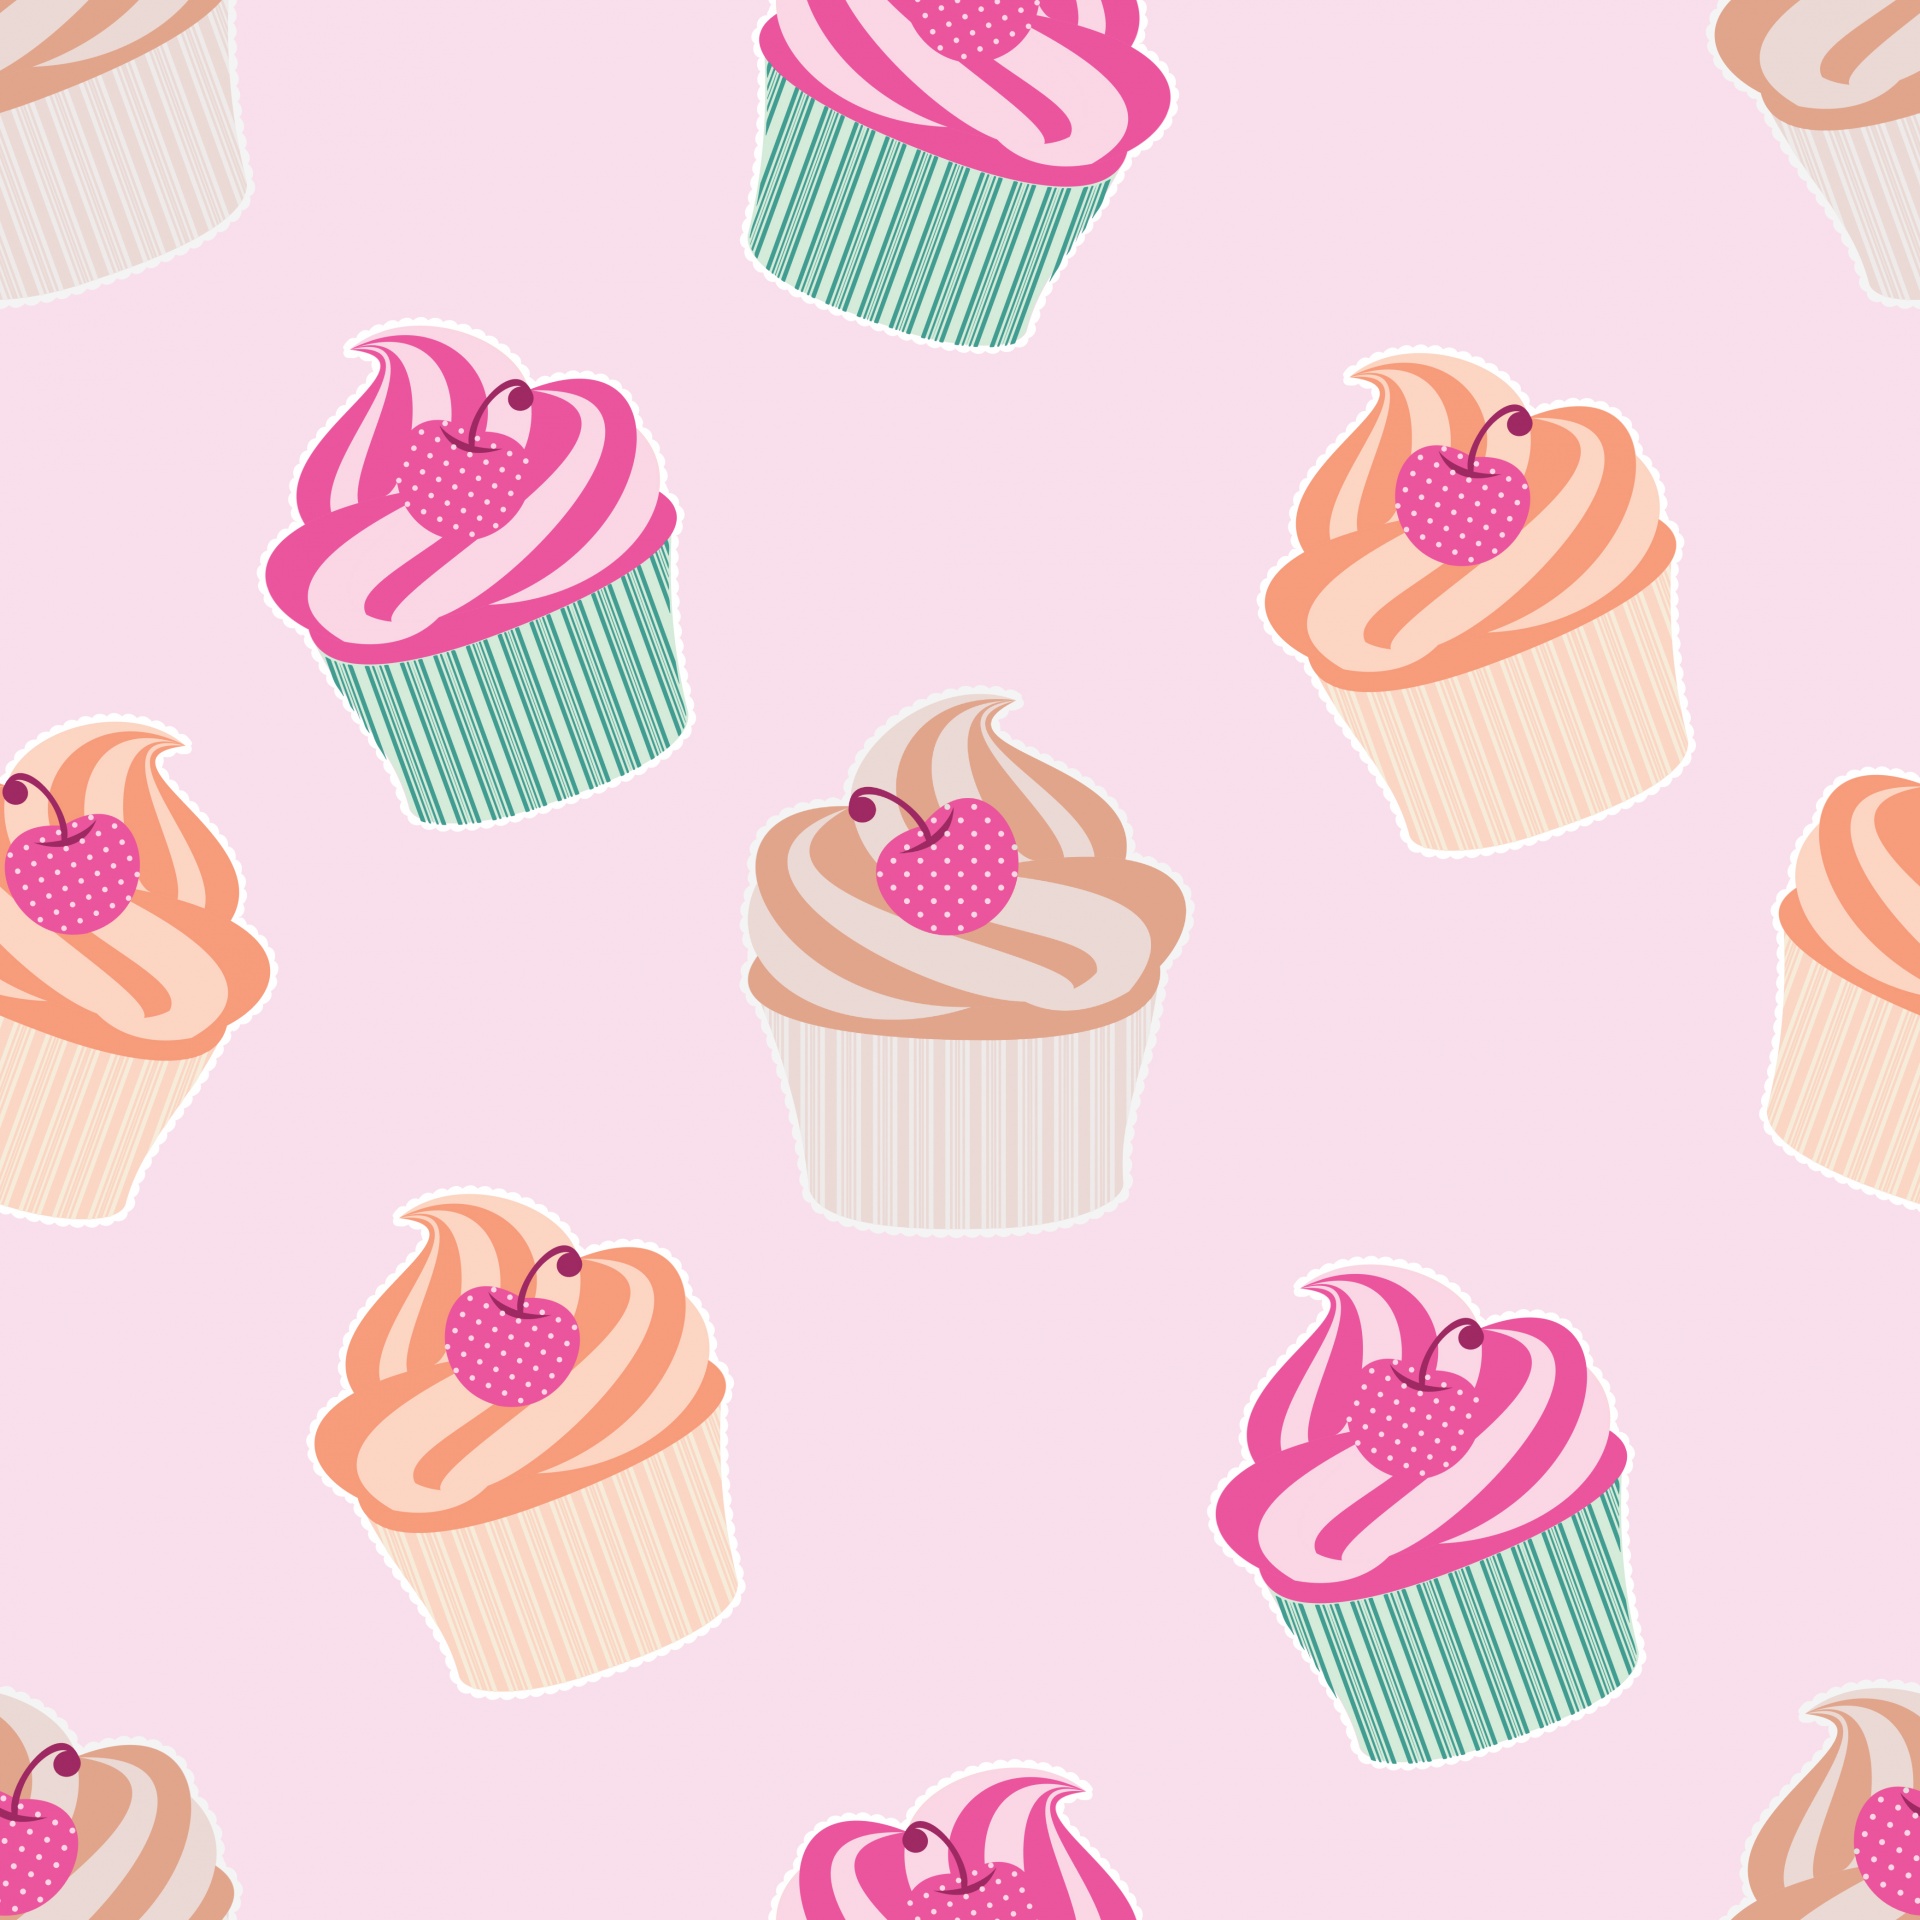 Cupcakes Wallpaper Background Free Stock Photo Public HD Wallpapers Download Free Images Wallpaper [wallpaper981.blogspot.com]